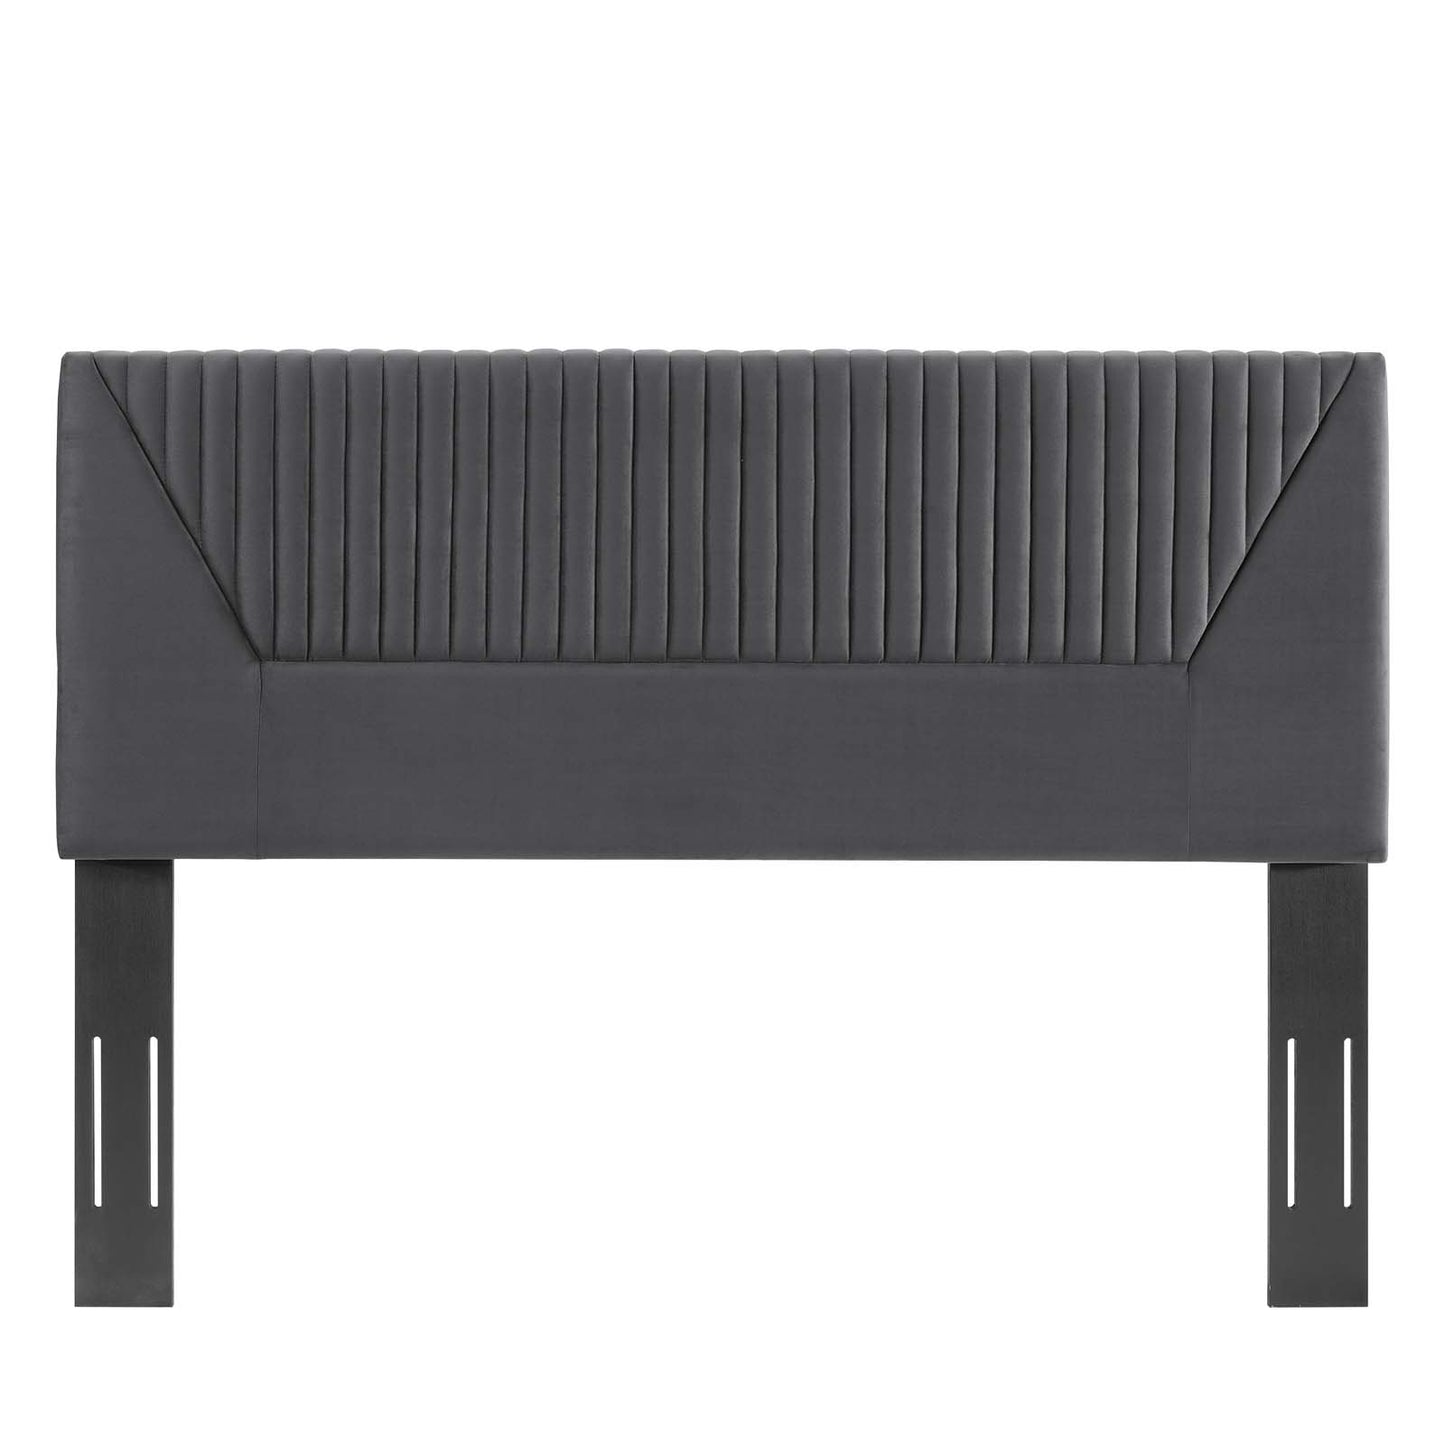 Patience Channel Tufted Performance Velvet Full/Queen Headboard Charcoal MOD-6668-CHA